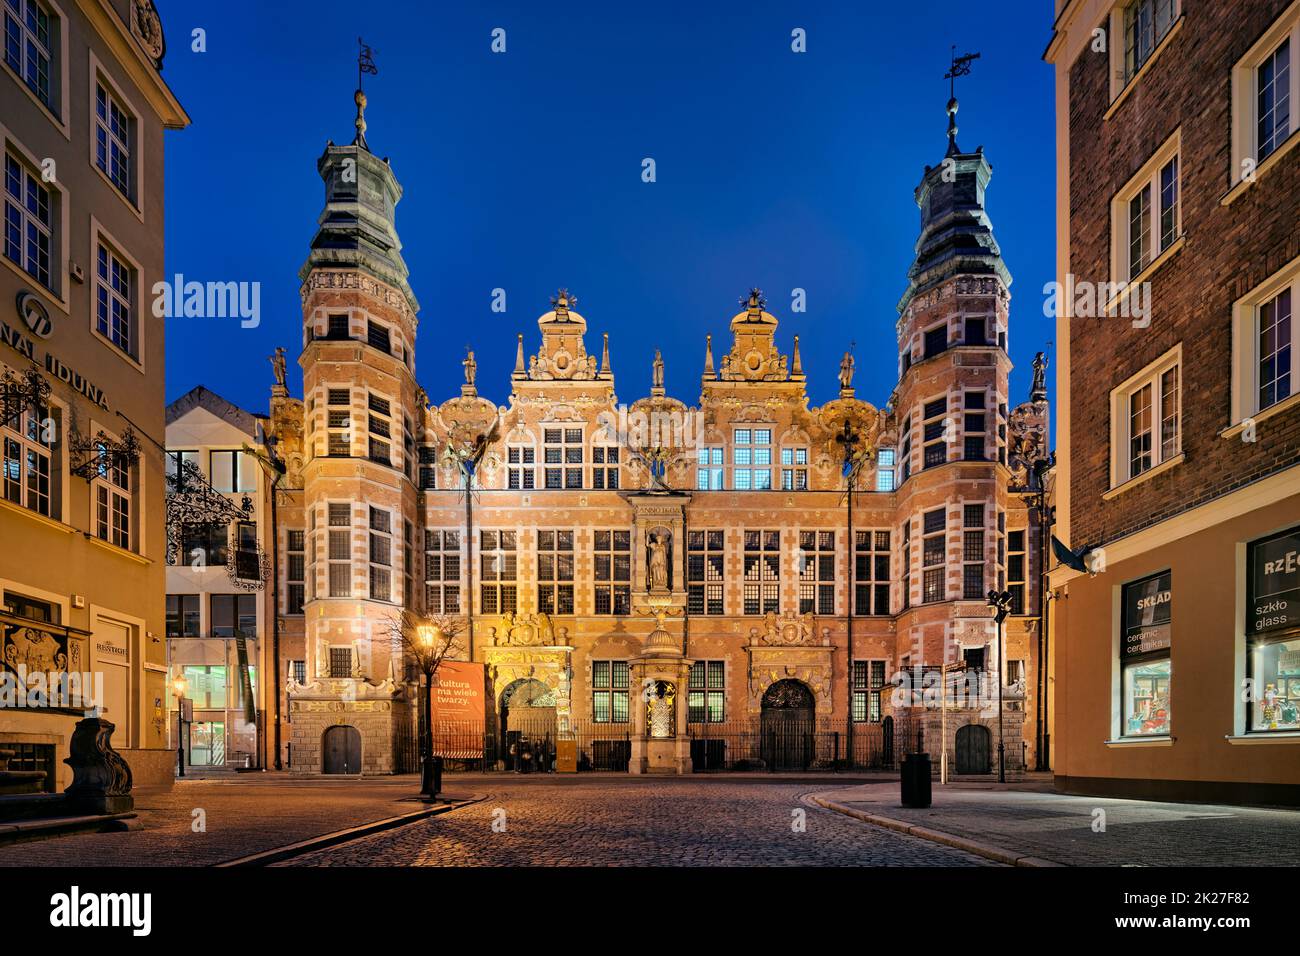 Poland, Gdansk - Mannerist Great Armoury, Gdansk Old Town Stock Photo